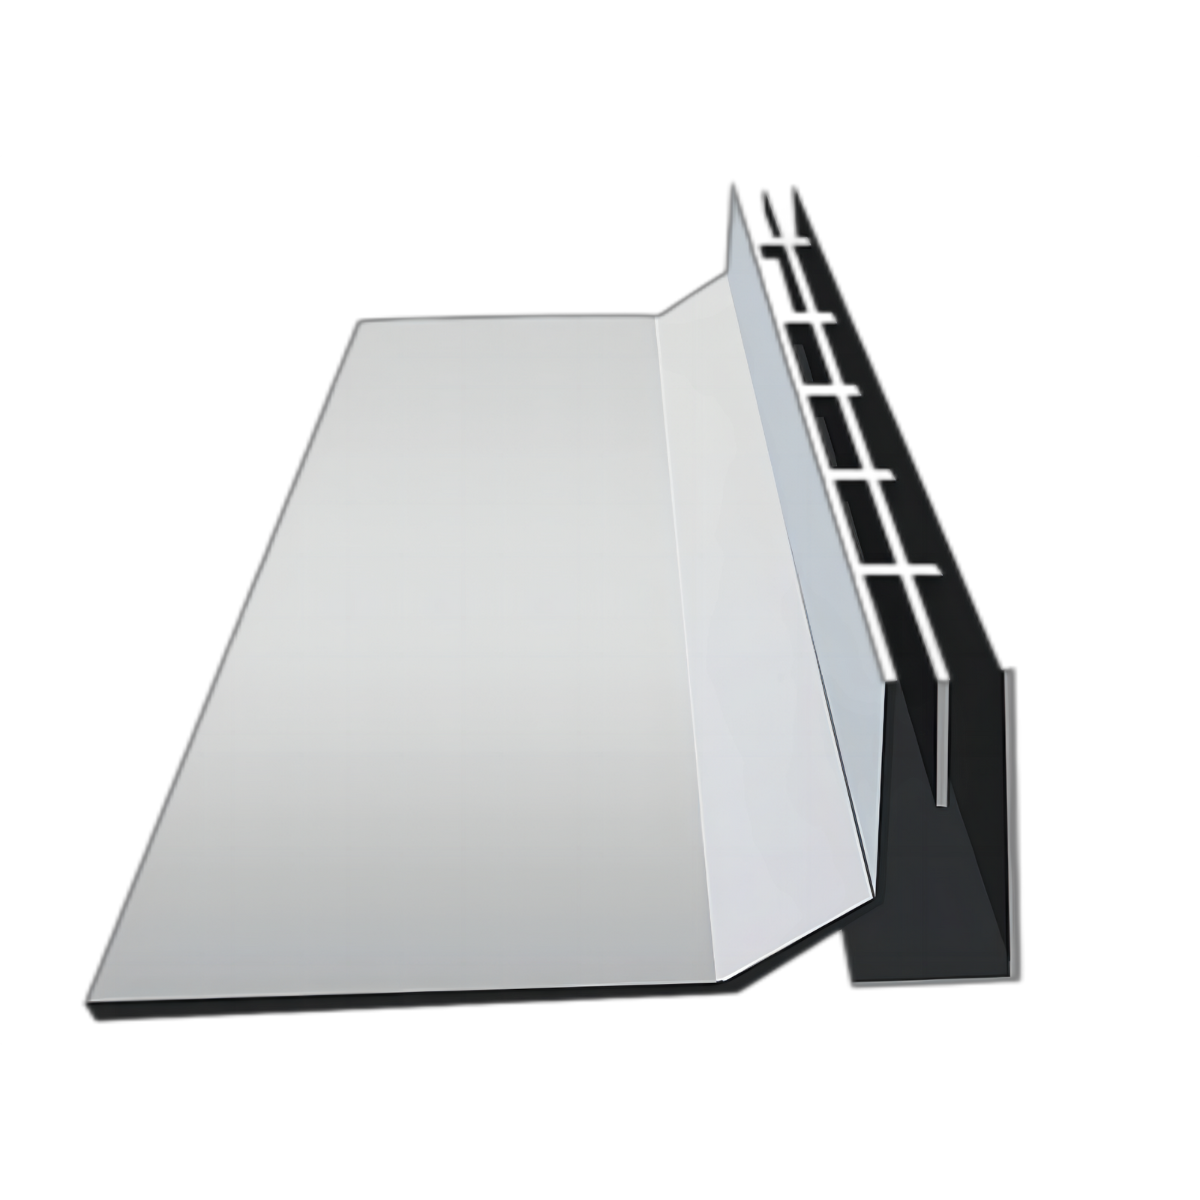 Stainless steel gutter cover Prefabricated resin gutter Linear drainage system Curved invisible sink cover